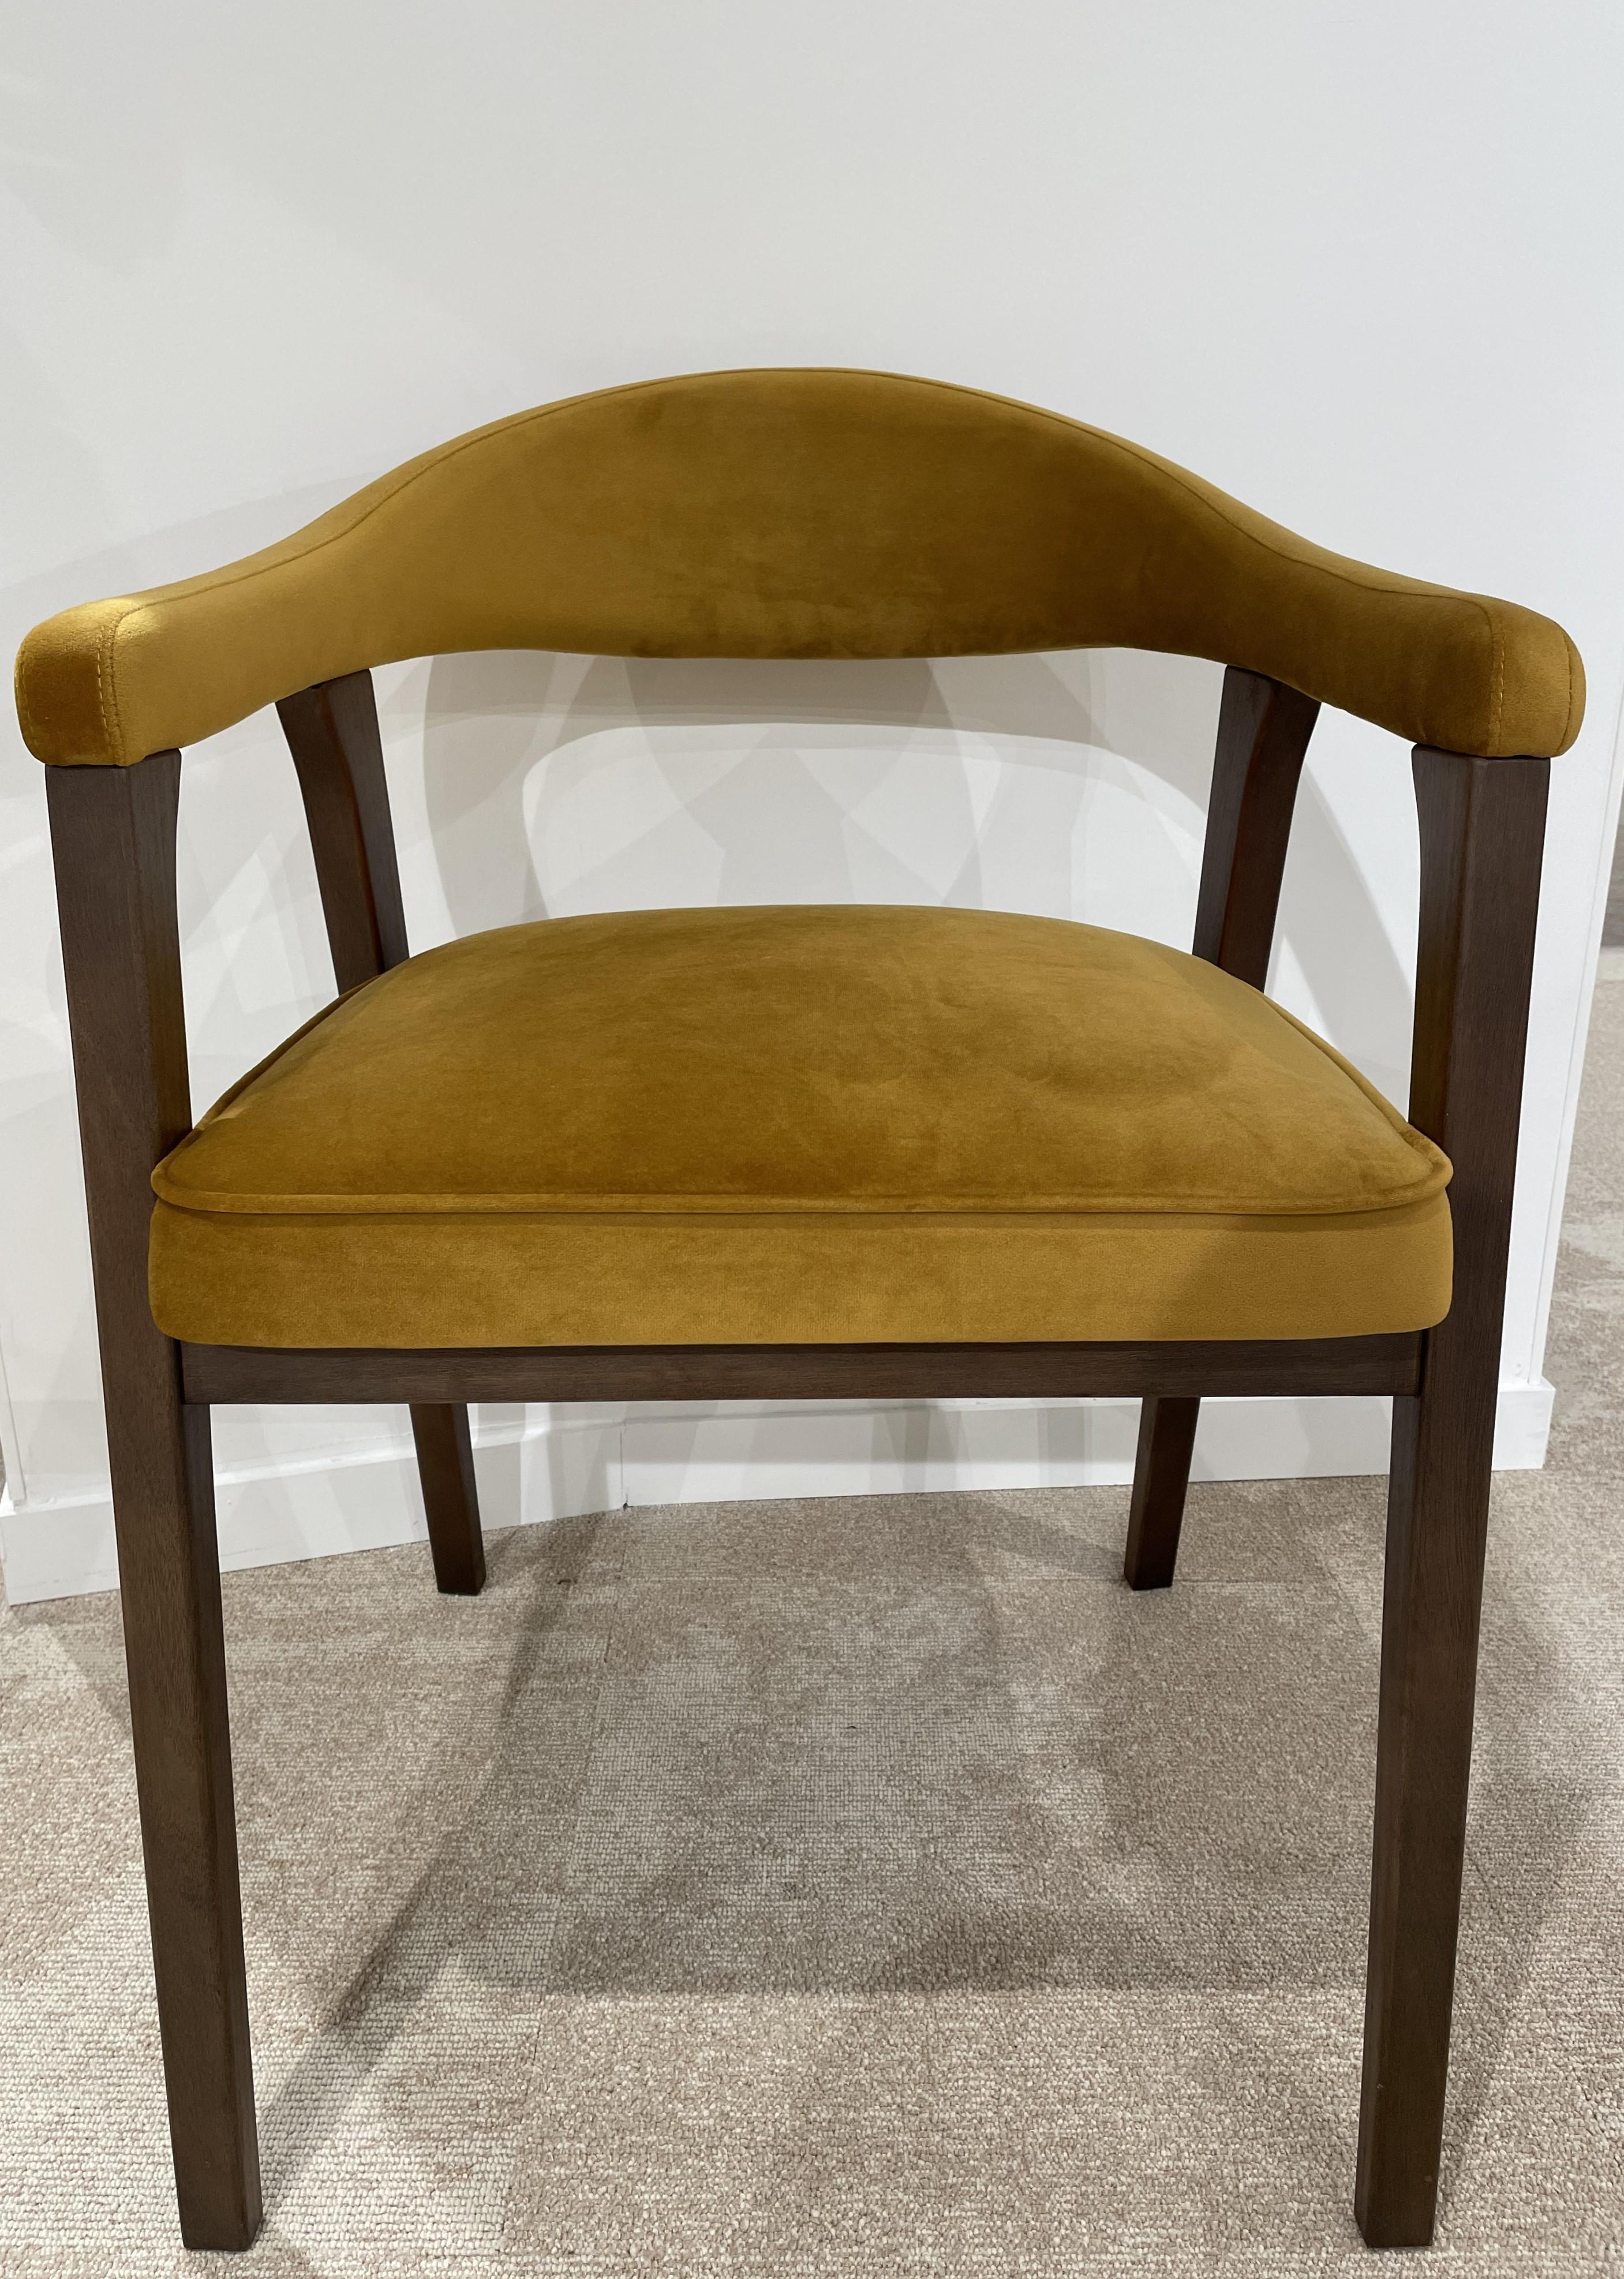 1960s Danish Design and Scandinavian Style Wooden and Velvet Fabric Chair For Sale 8